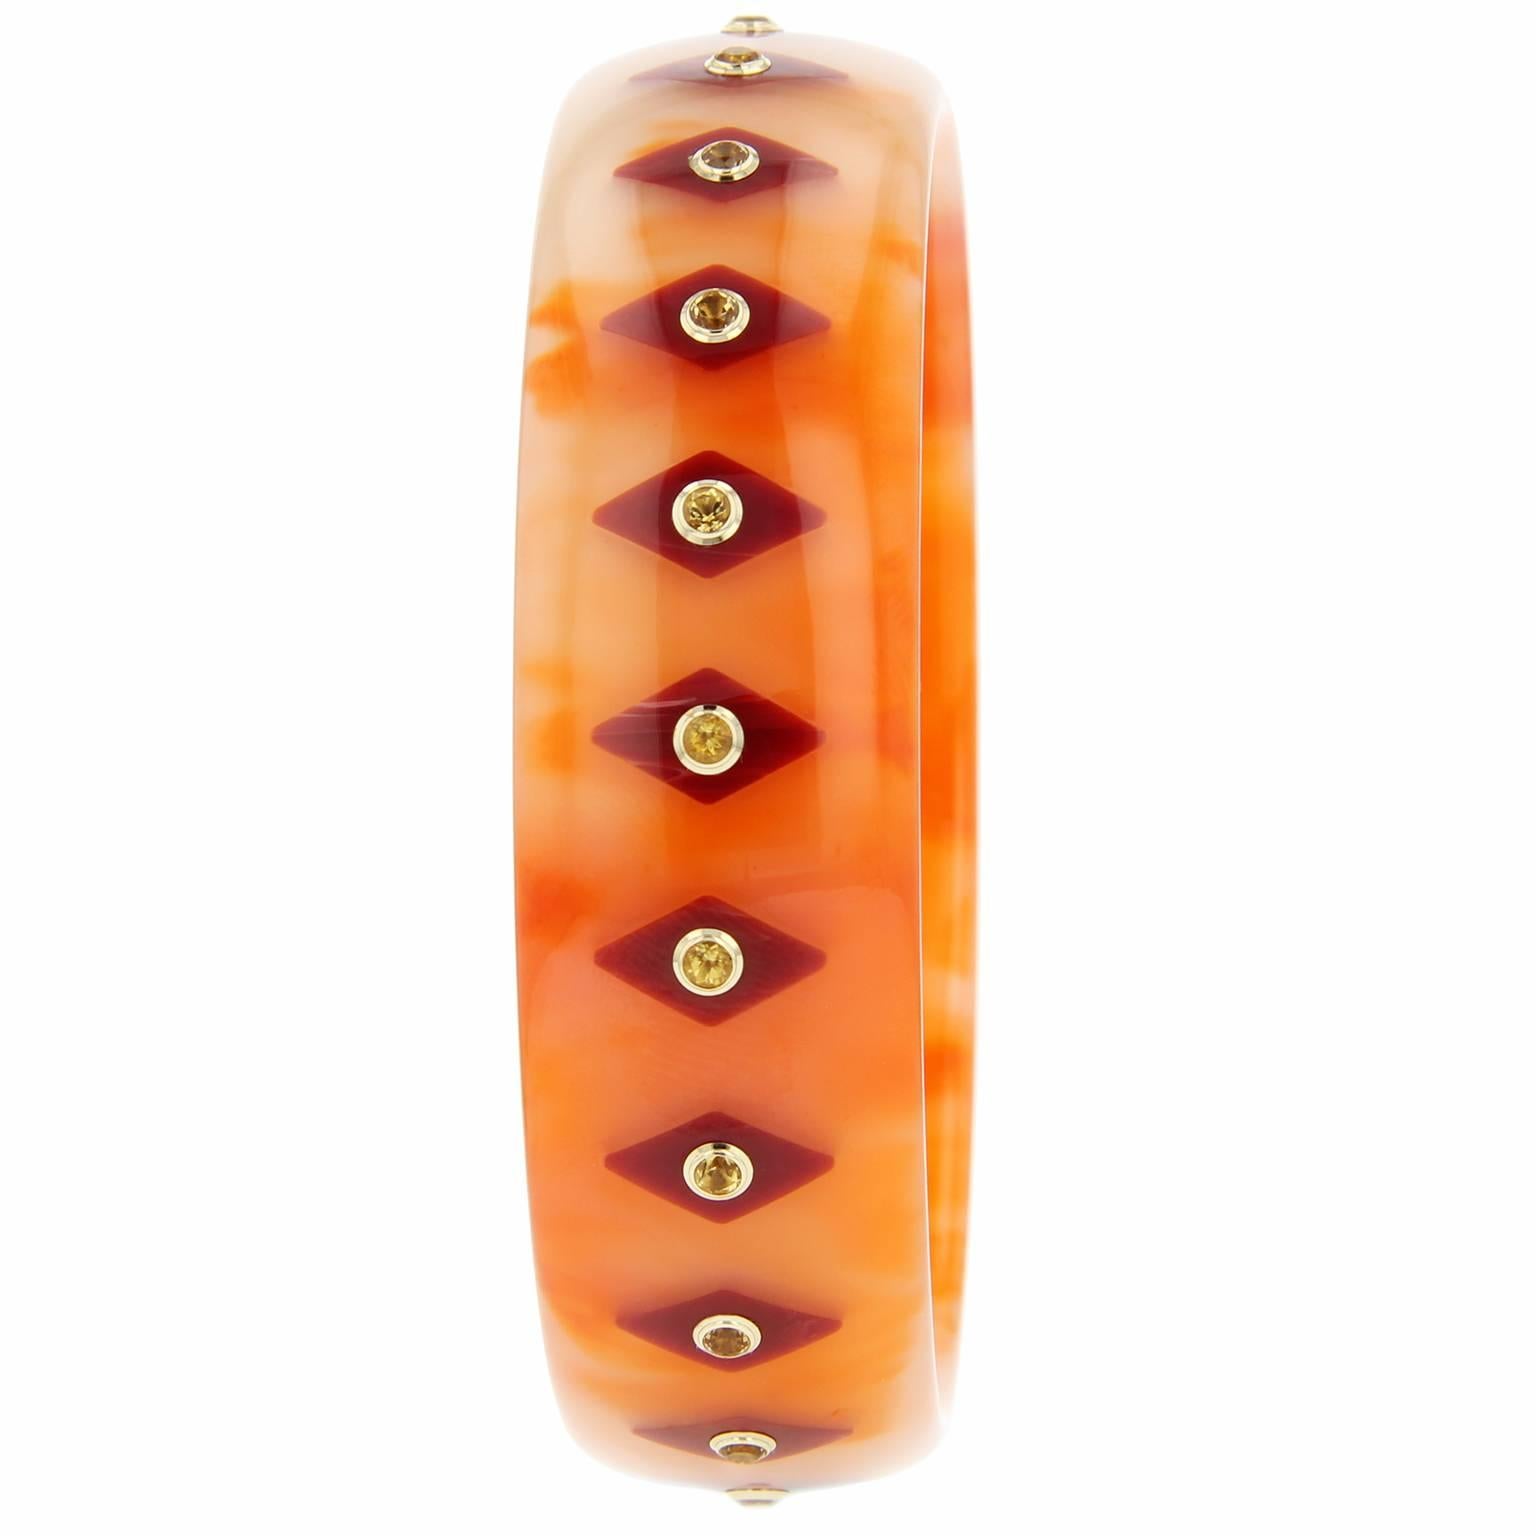 This uniquely colored Mark Davis bangle was handcrafted of marbled orange and pink vintage bakelite and inlayed with diamond-shaped pieces of burgundy bakelite. Each station is centered with a citrine bezel-set in 18k yellow gold. 

Full details